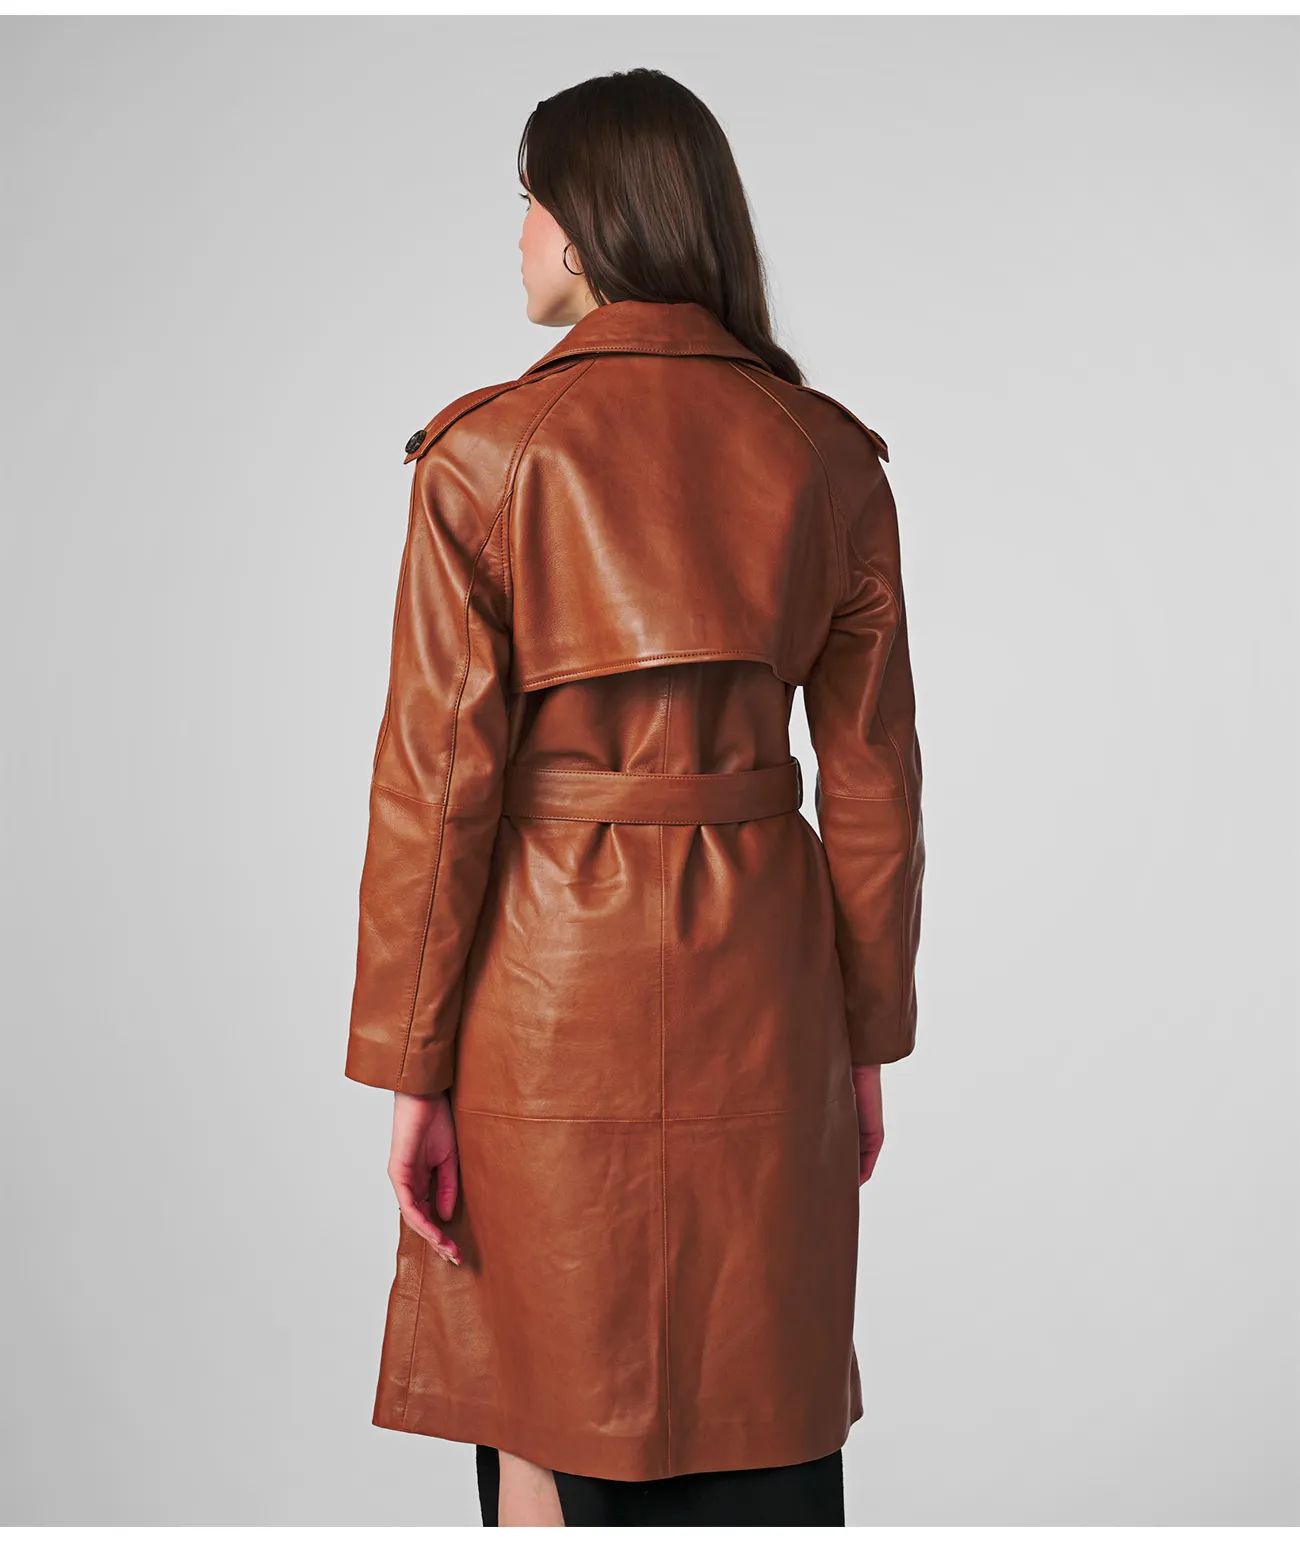 Ayla Trench Coat With Belt | Wilsons Leather